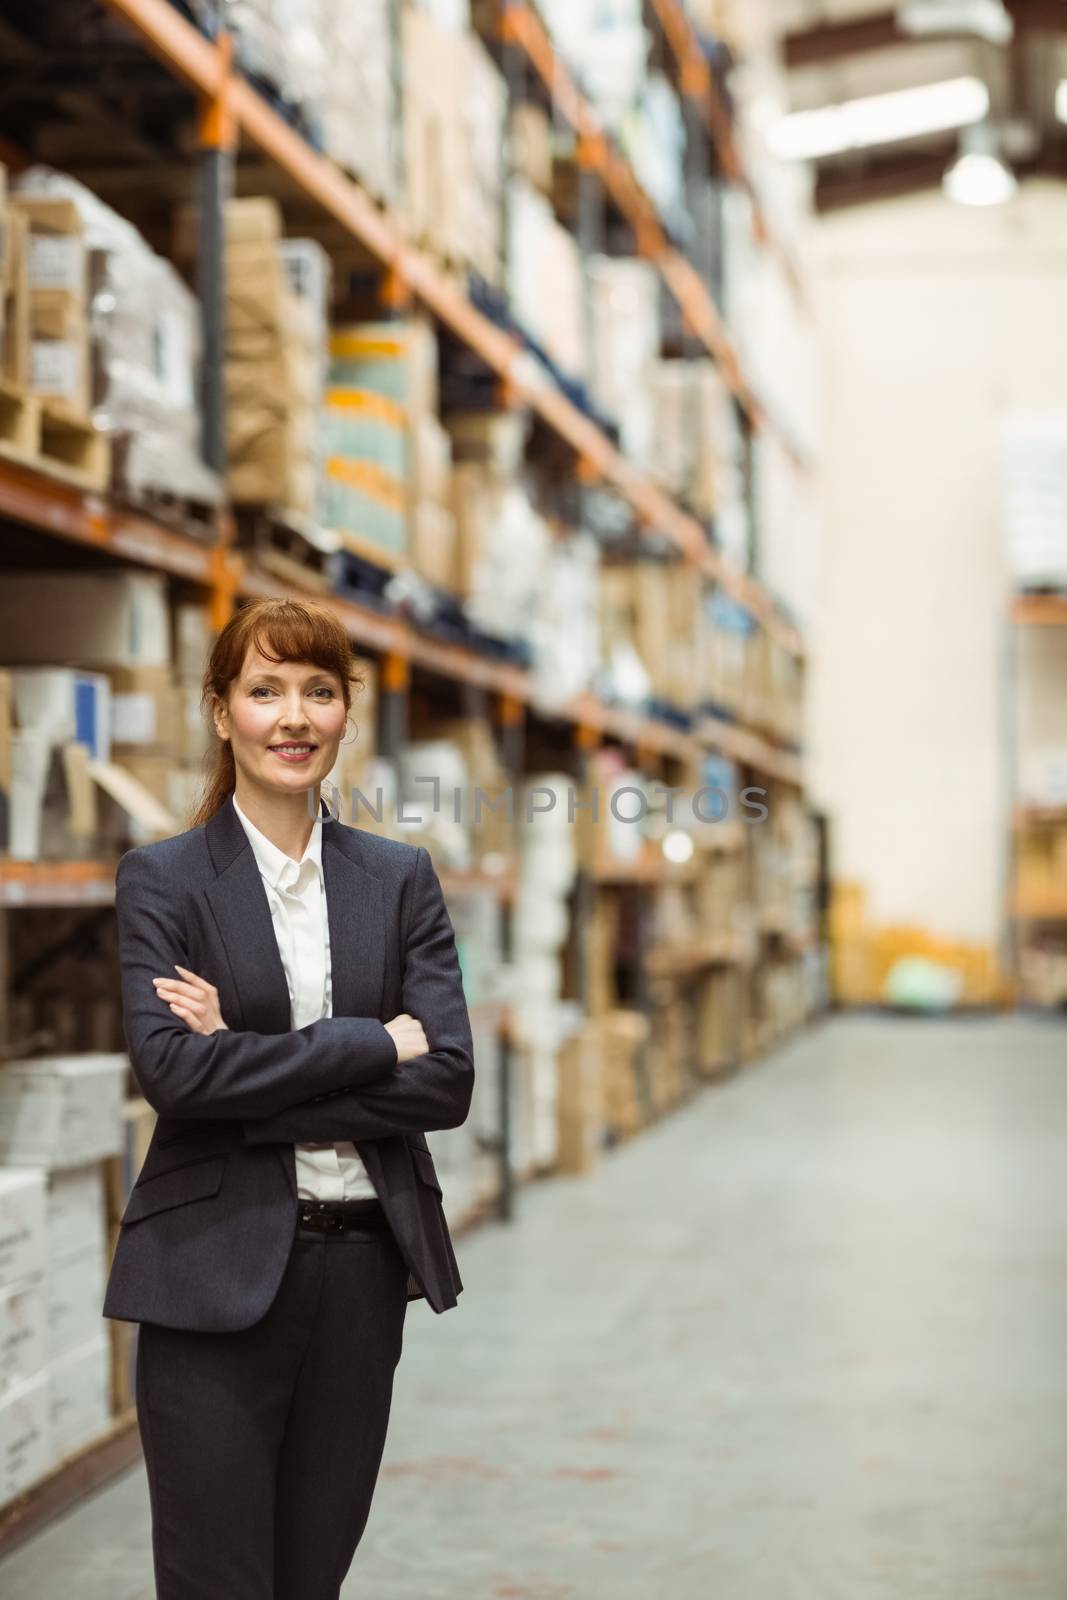 Female manager with arms crossed in a large warehouse